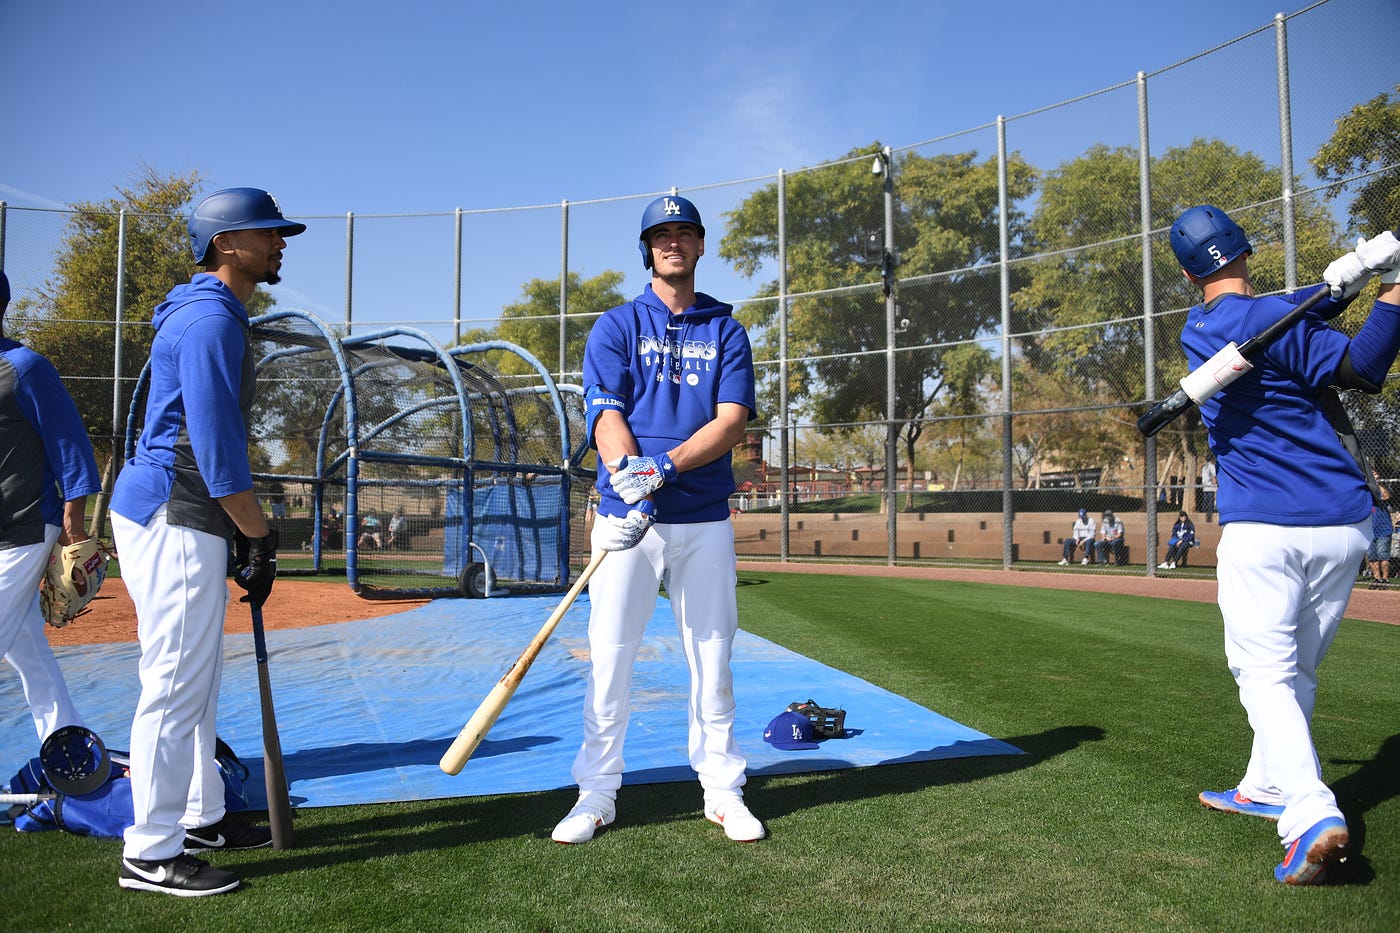 Dodgers announce 2018 Spring Training schedule, by Rowan Kavner